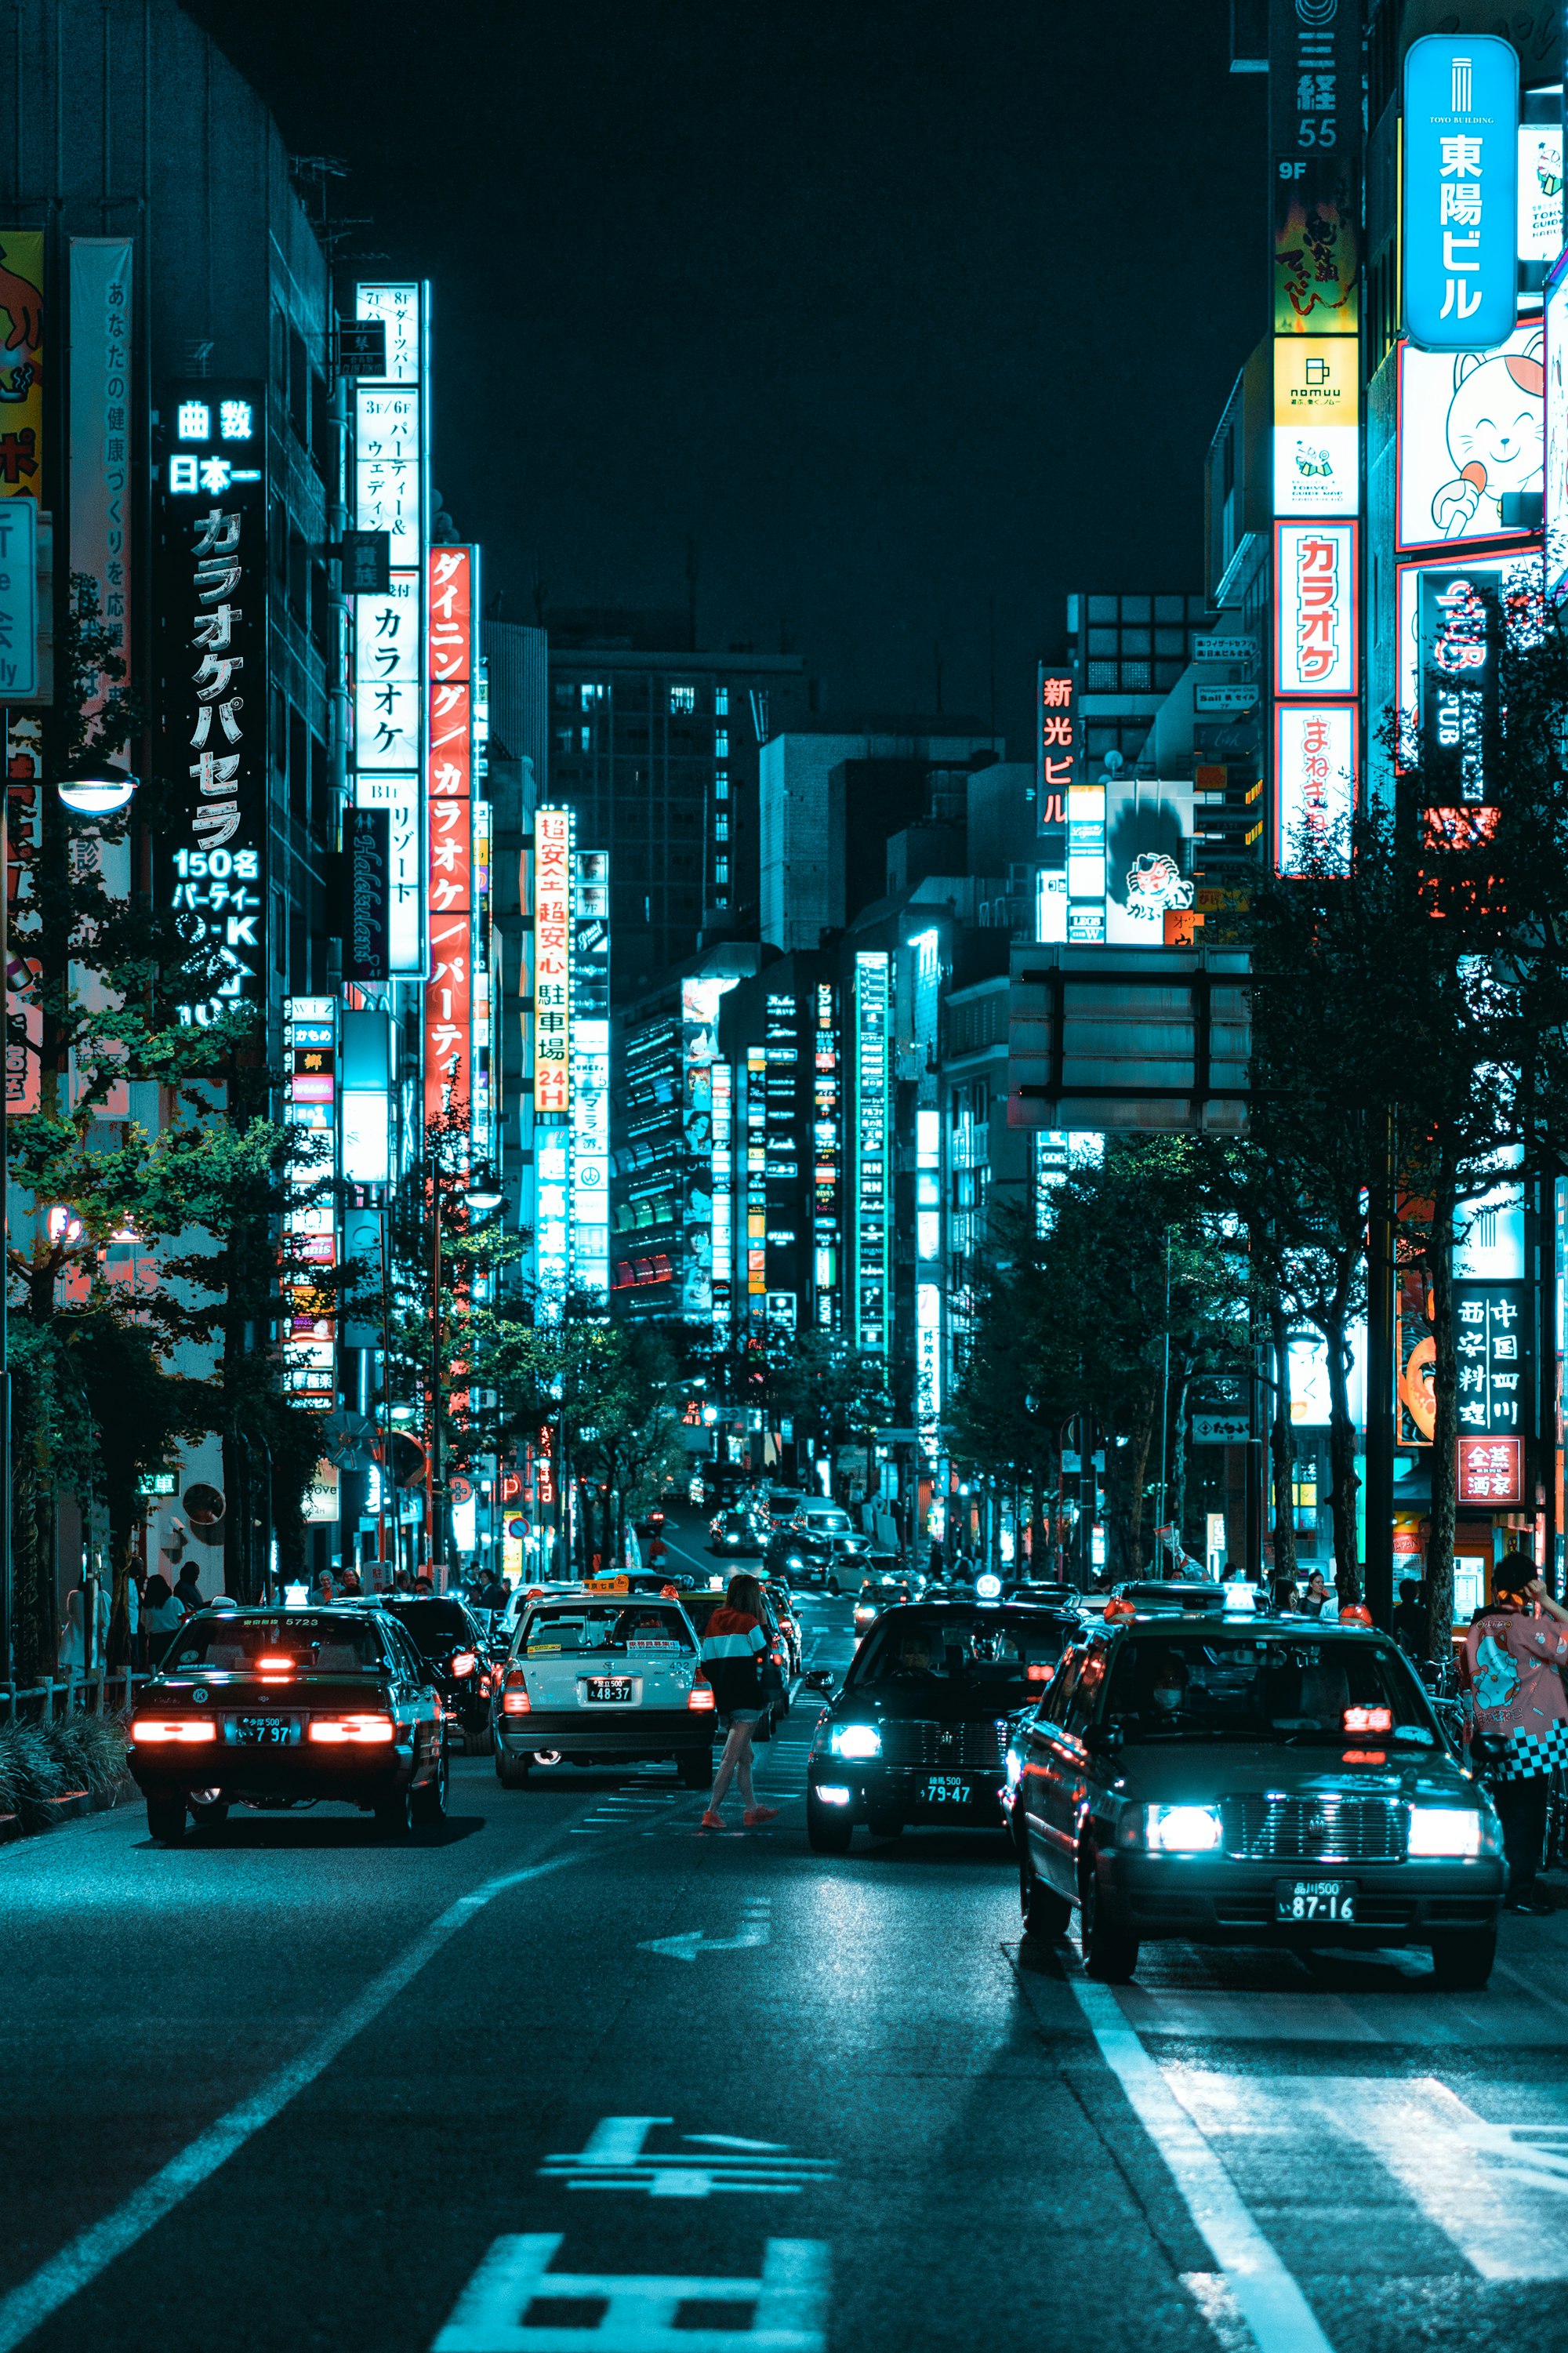 lost in tokyo